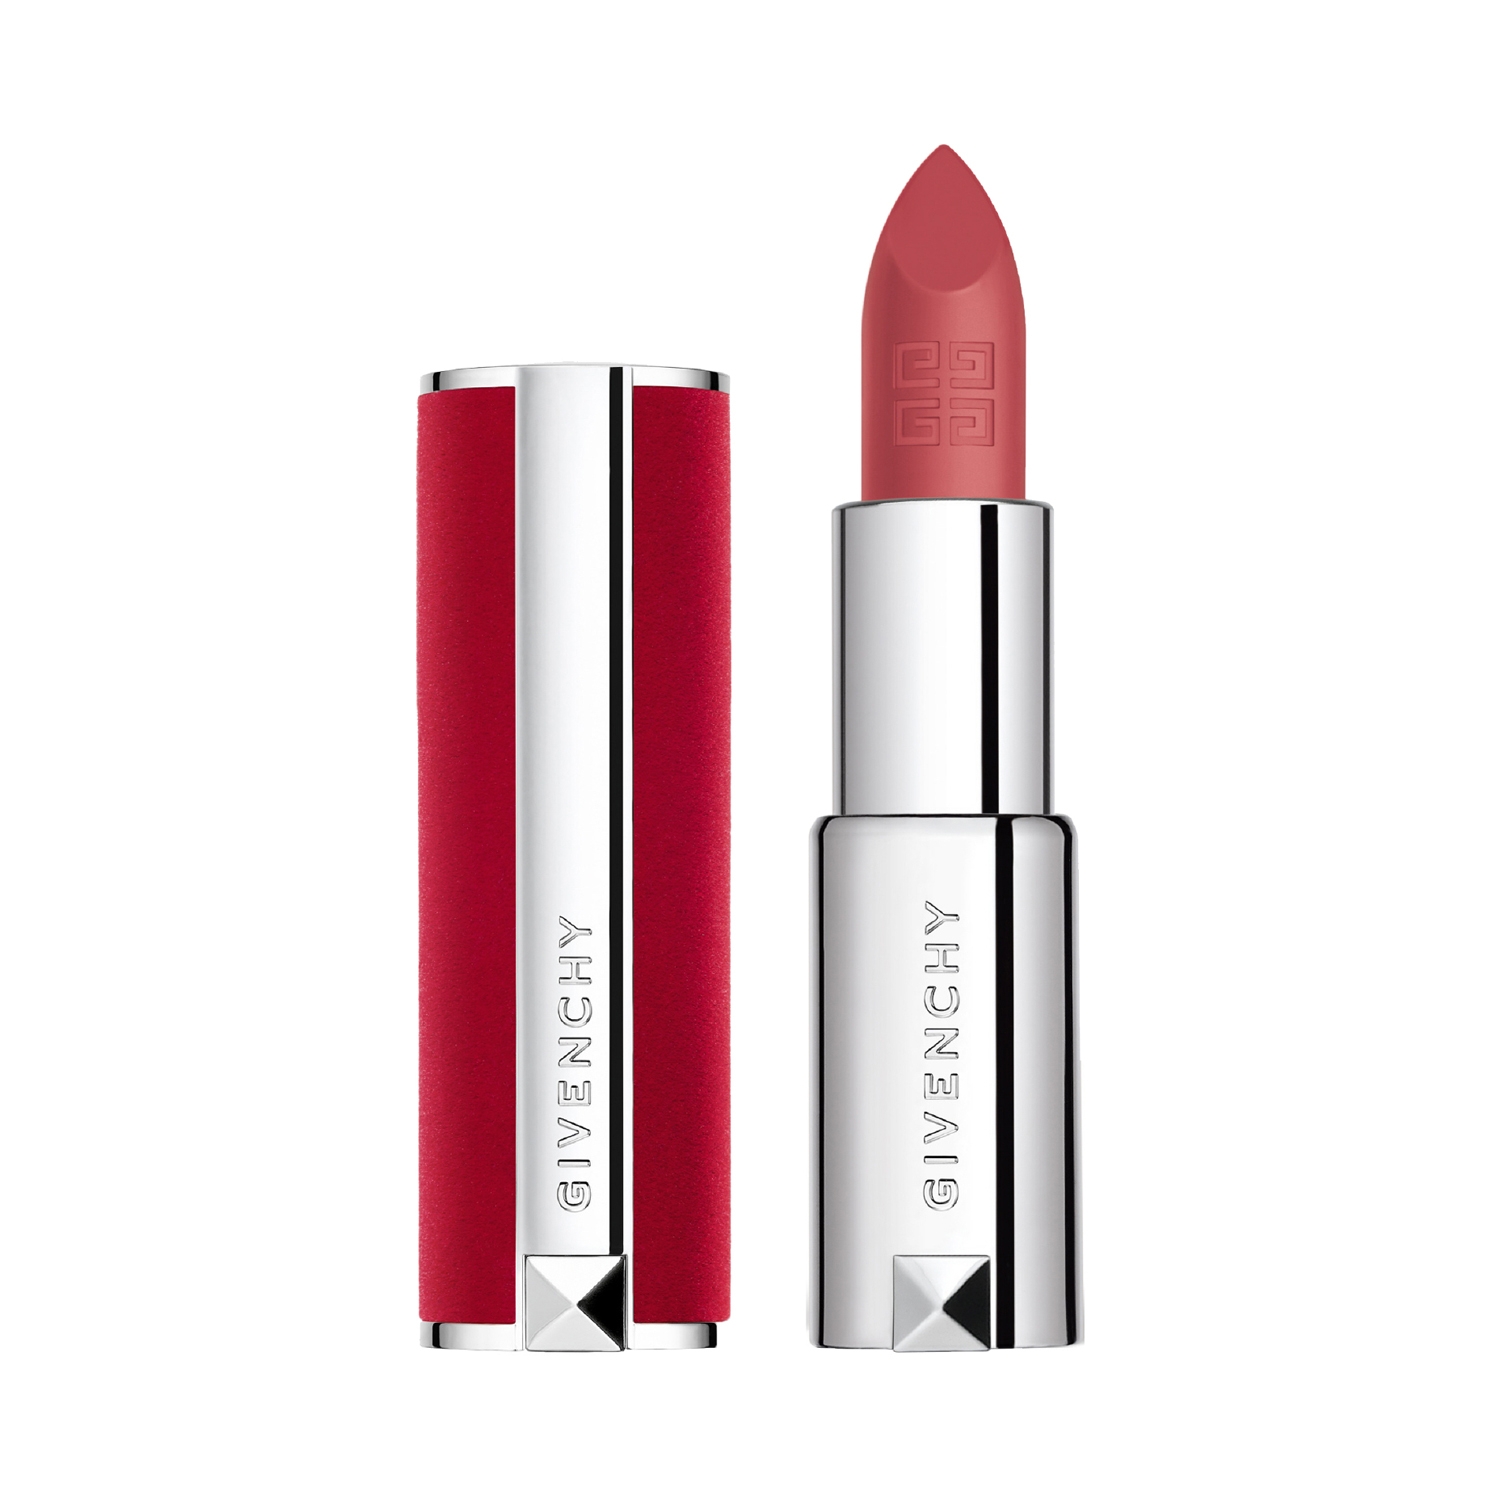 Givenchy | Givenchy Le Rouge Deep Velvet Lipstick - N 12 Nude Rose (3.4g)